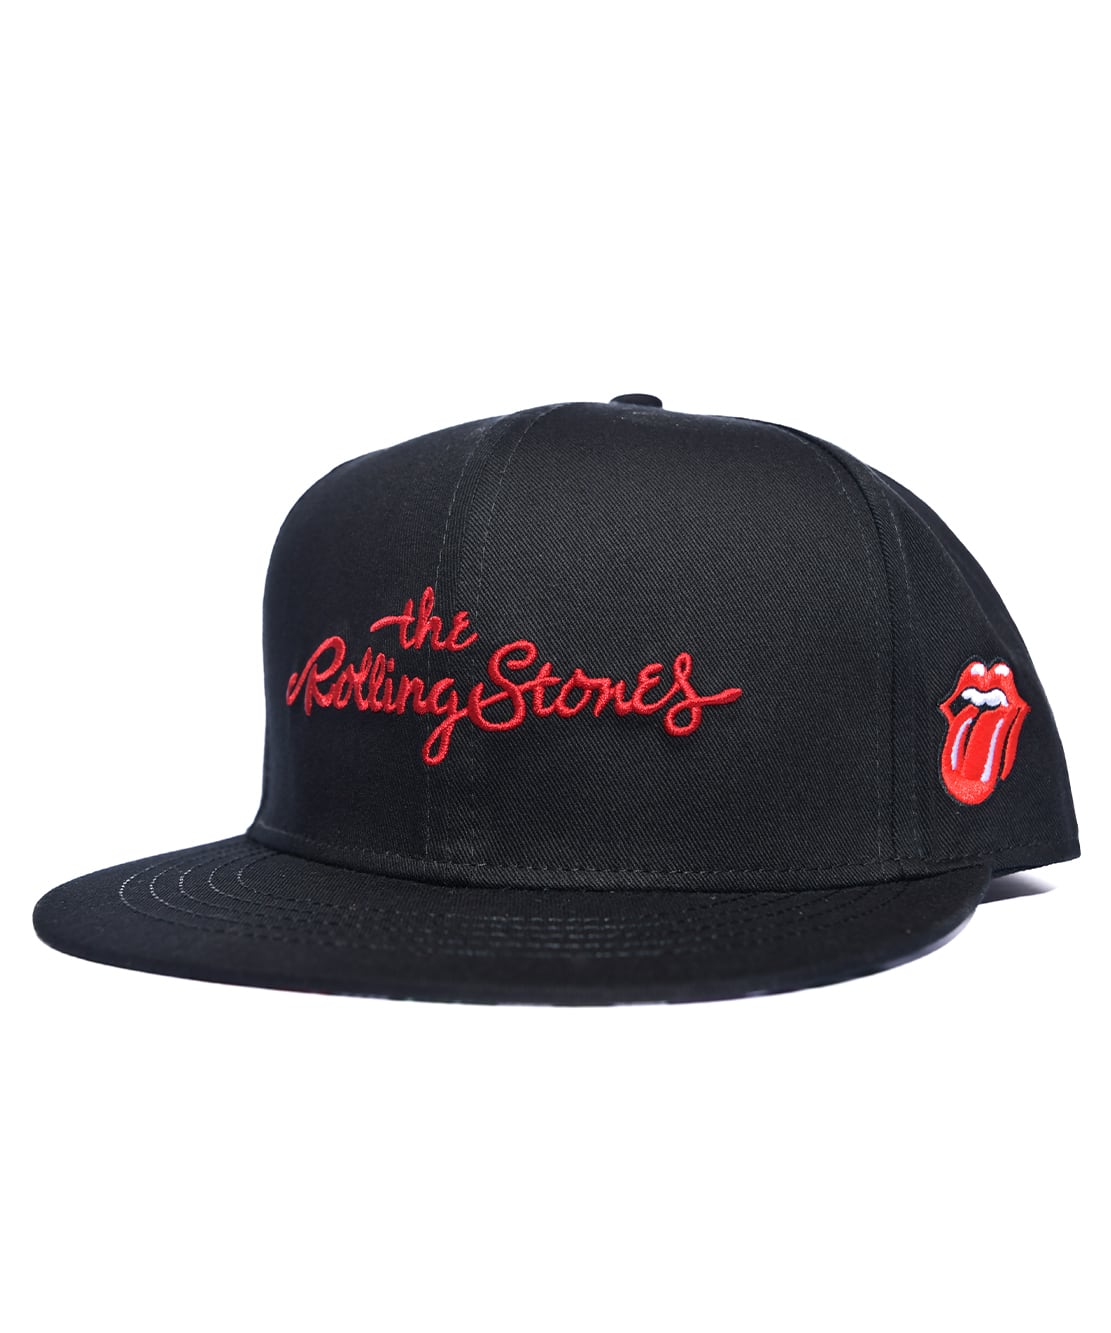 THE ROLLING STONES ローリング・ストーンズ キャップ | 【公式】カルト